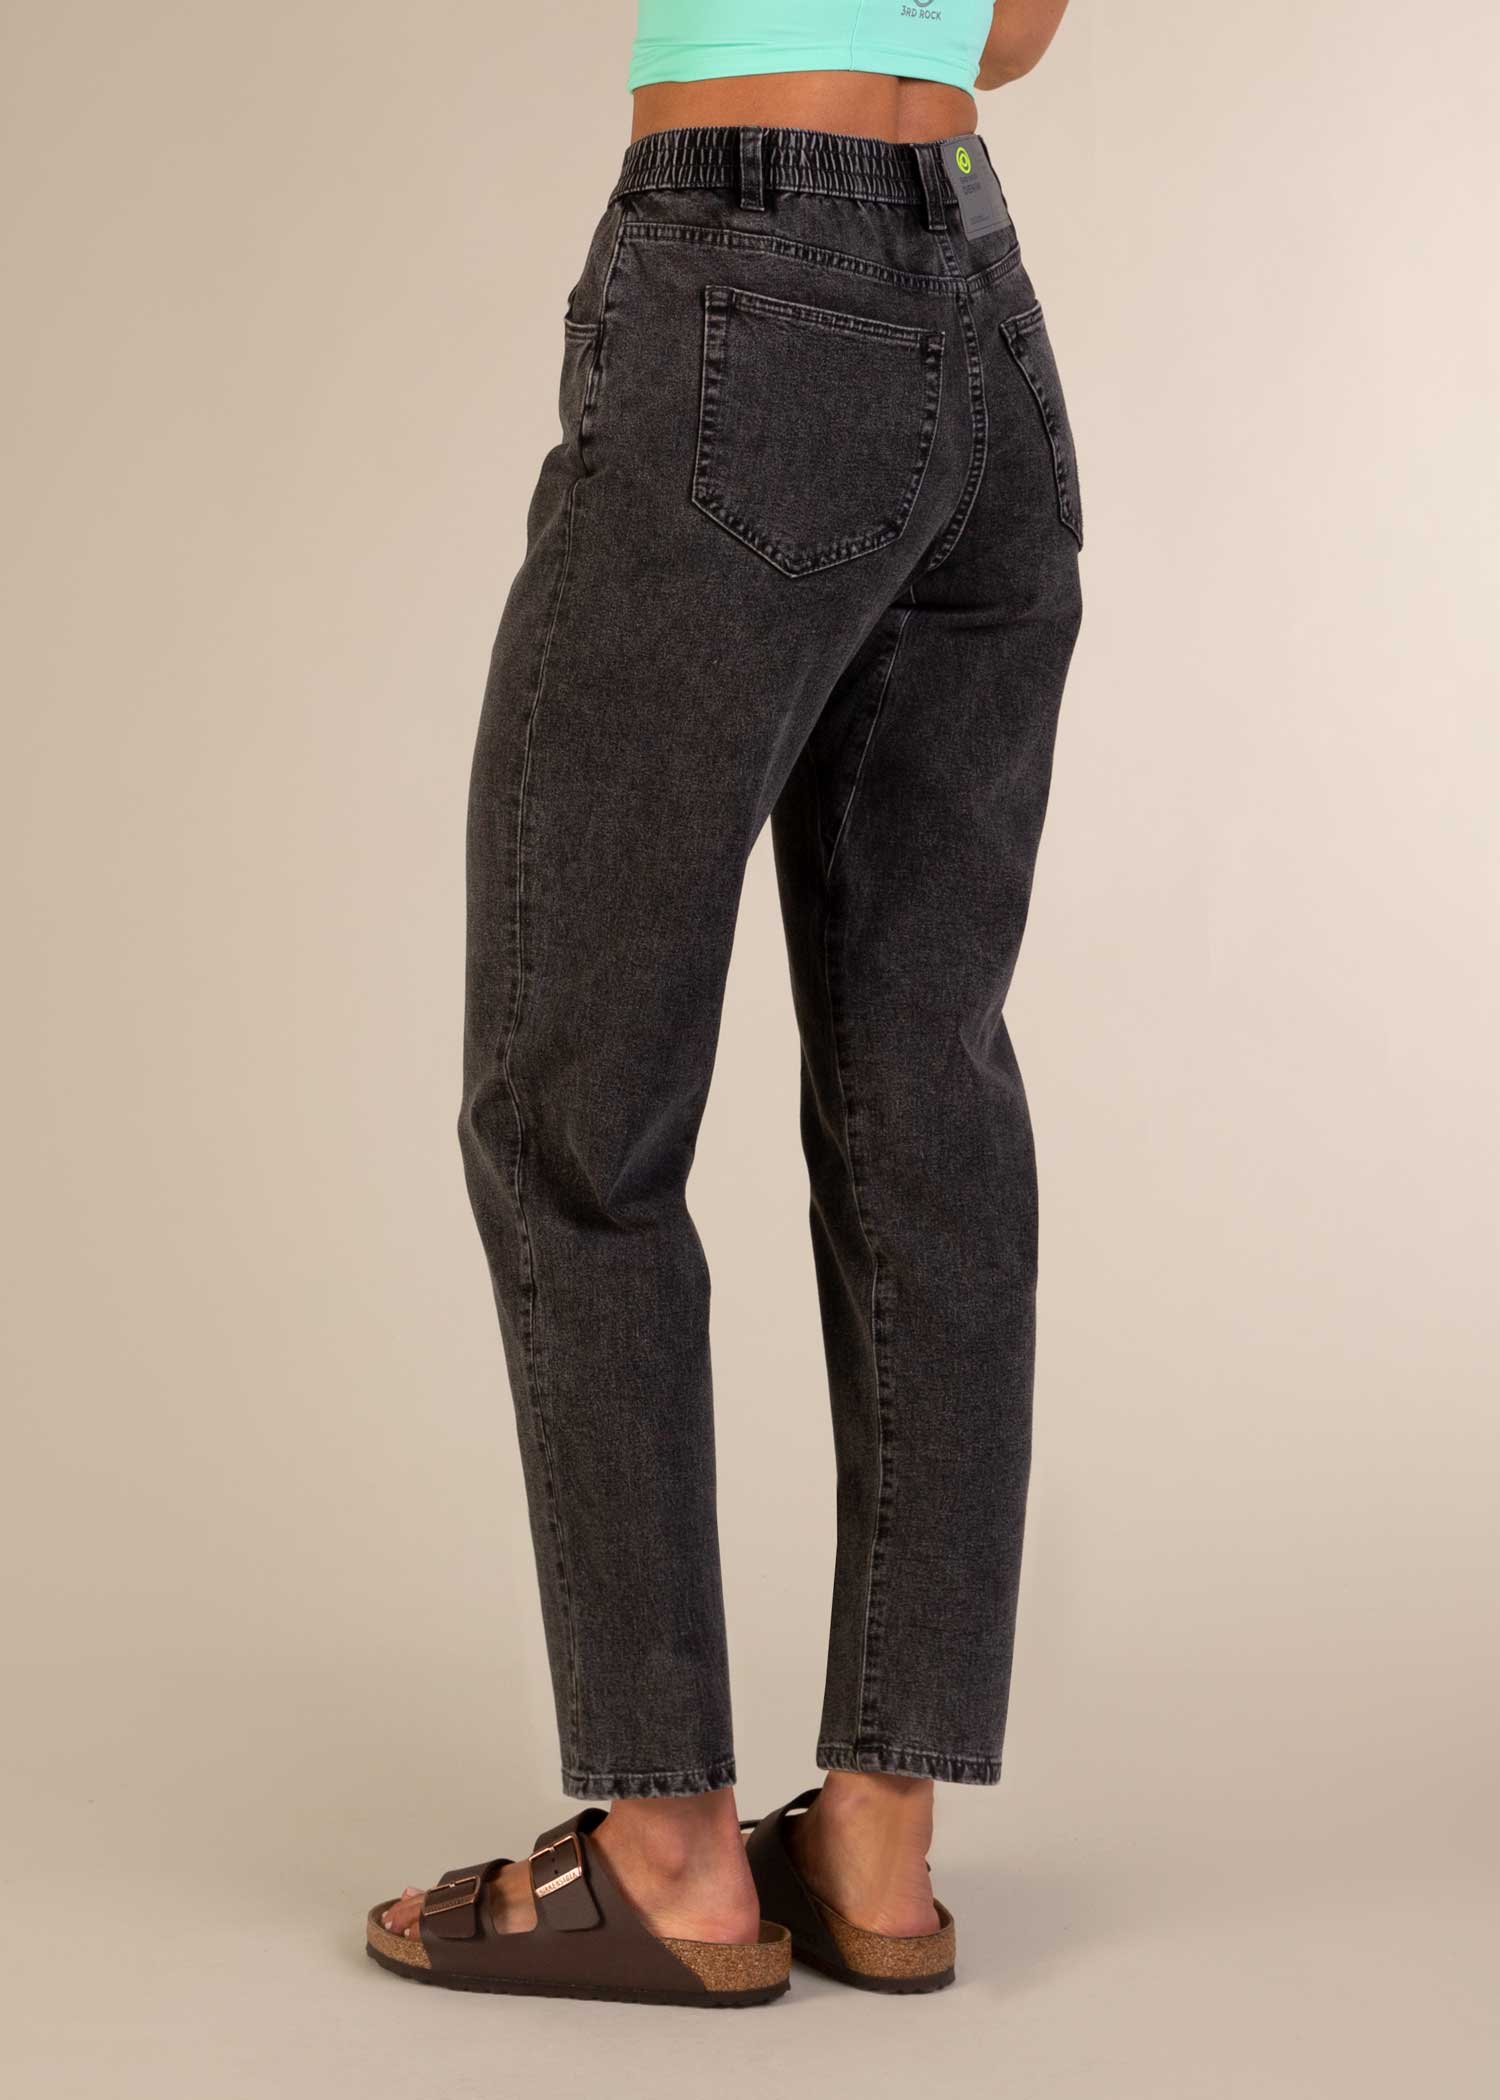 3RD ROCK outdoor adventure jeans - Natasha is 5ft 9" with a 25" waist, and is wearing a 28 RL. F